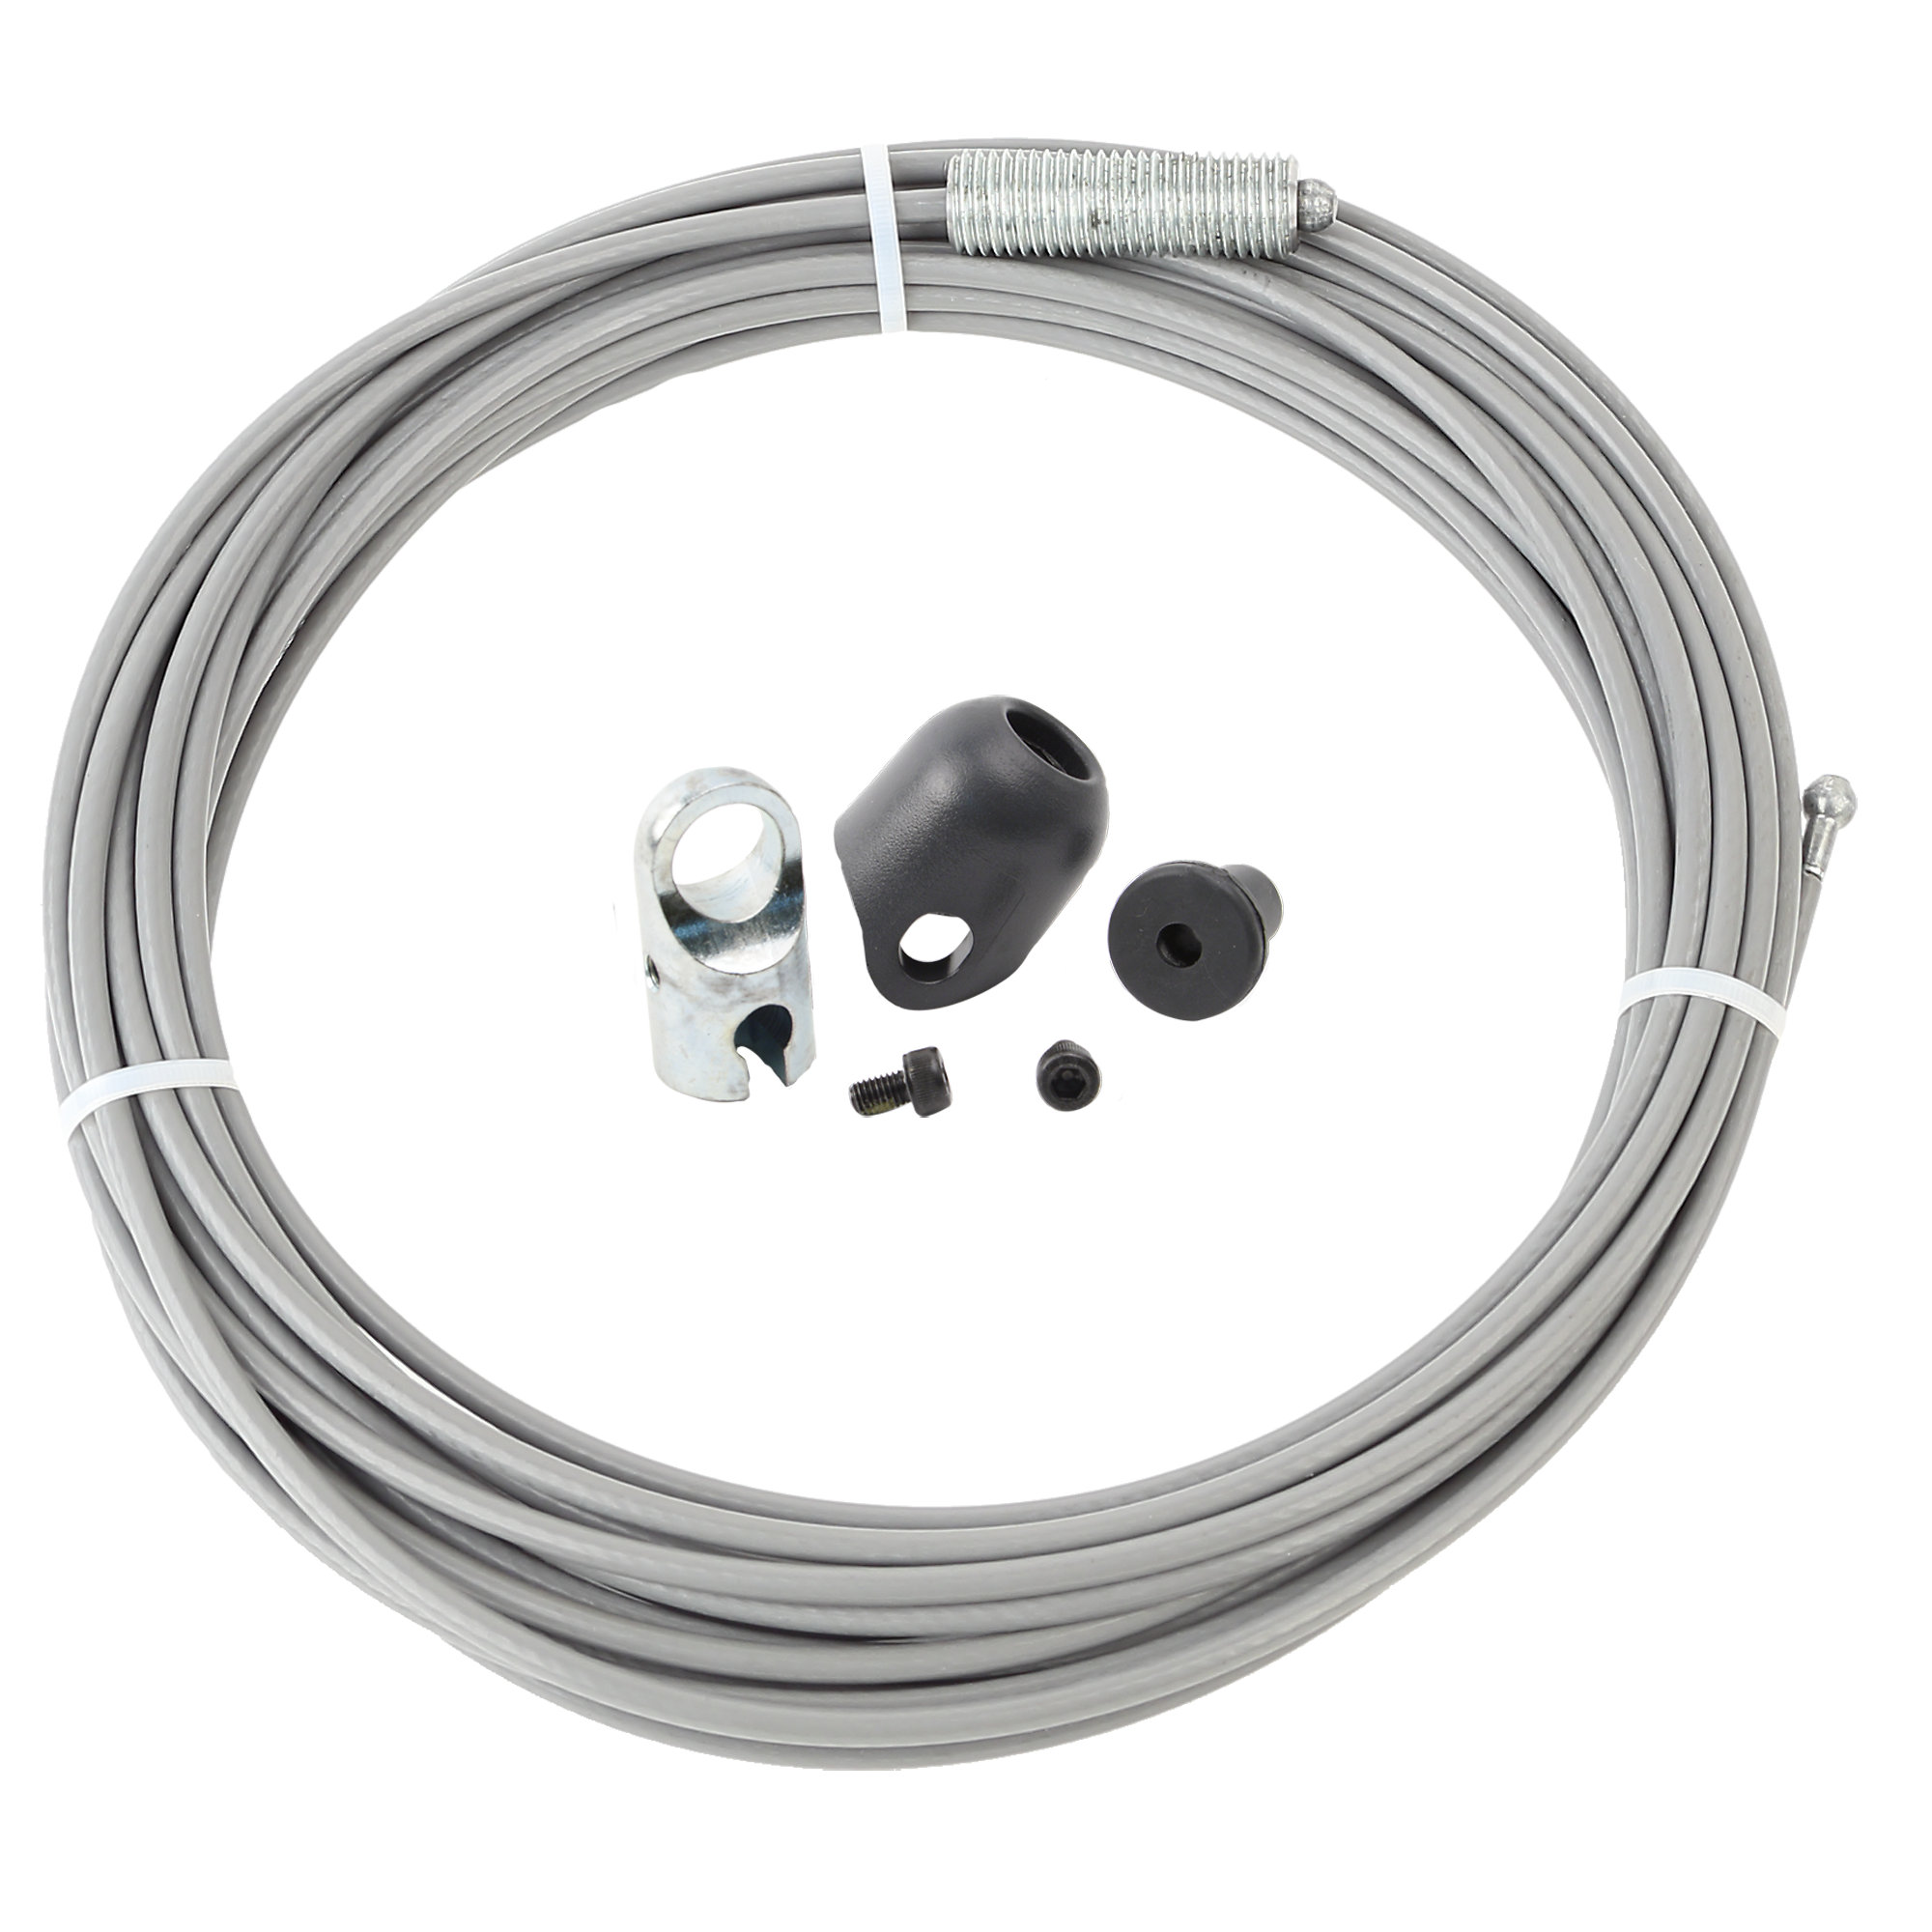 Cable Kit for Dual Adjustable Pulley, LifeFitness, Signature Series Cable Motion, Serial# 0612000 and below